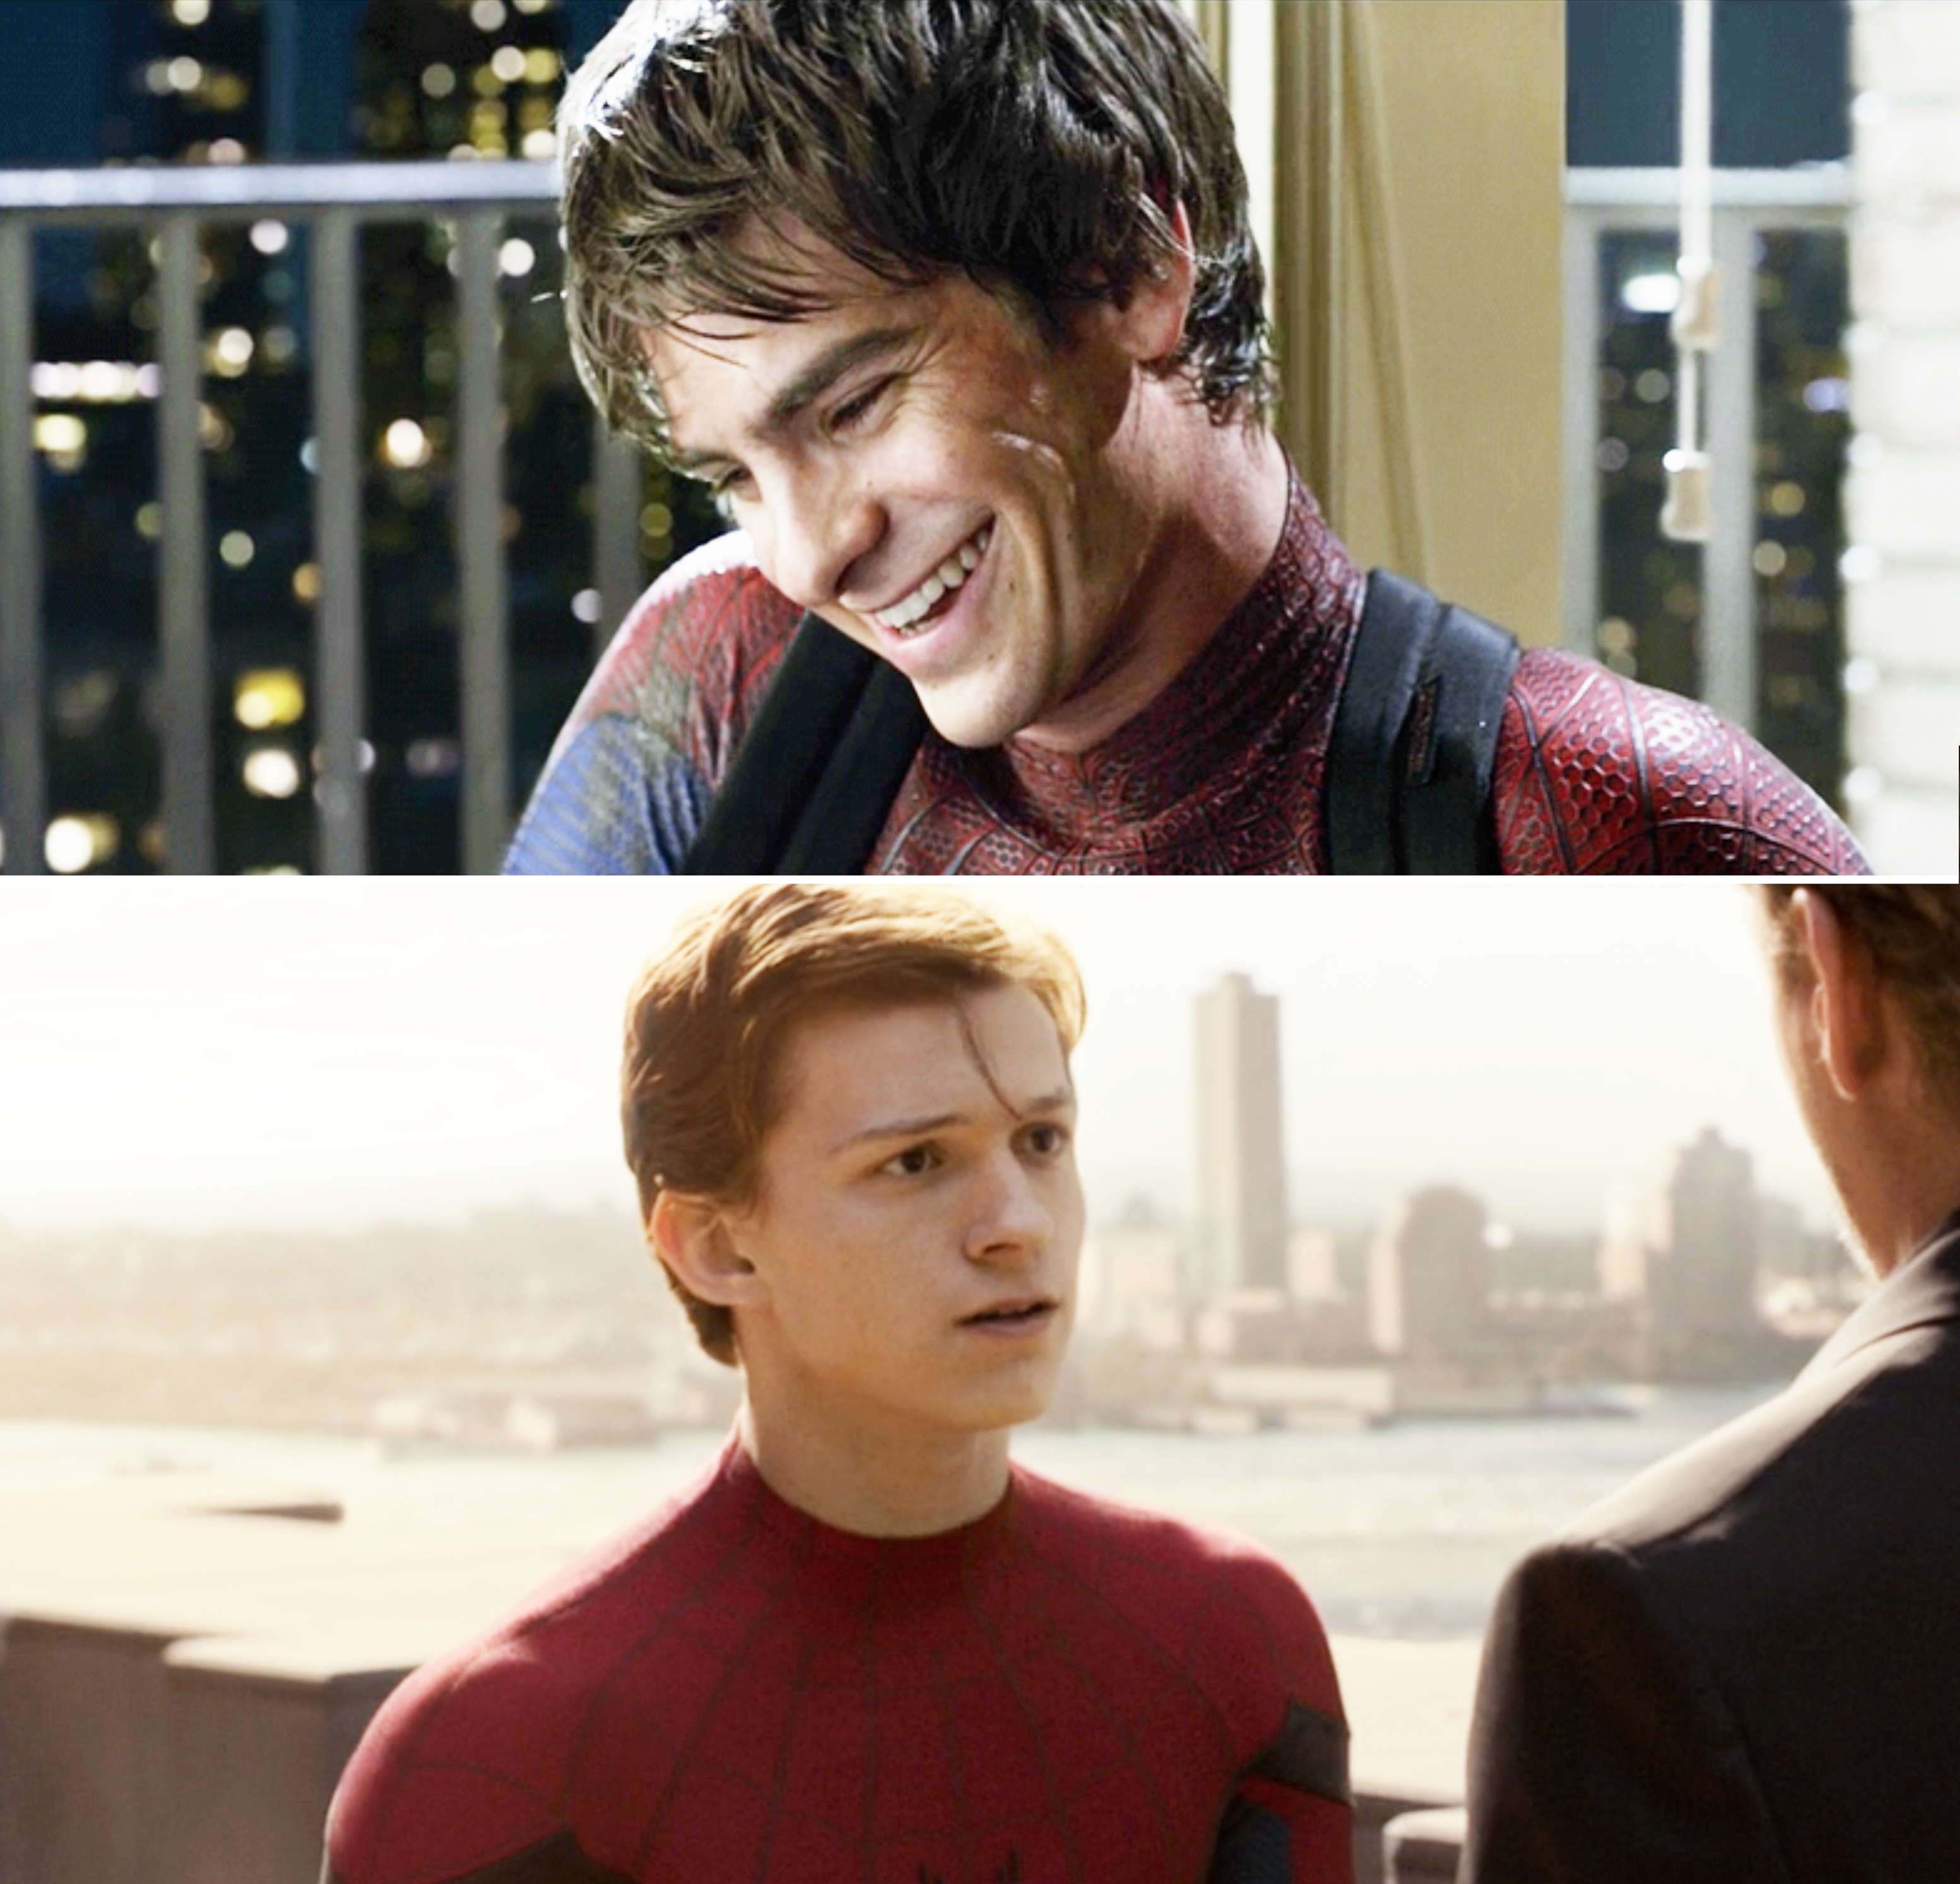 A smiling Andrew and a serious Tom as Spider-Man